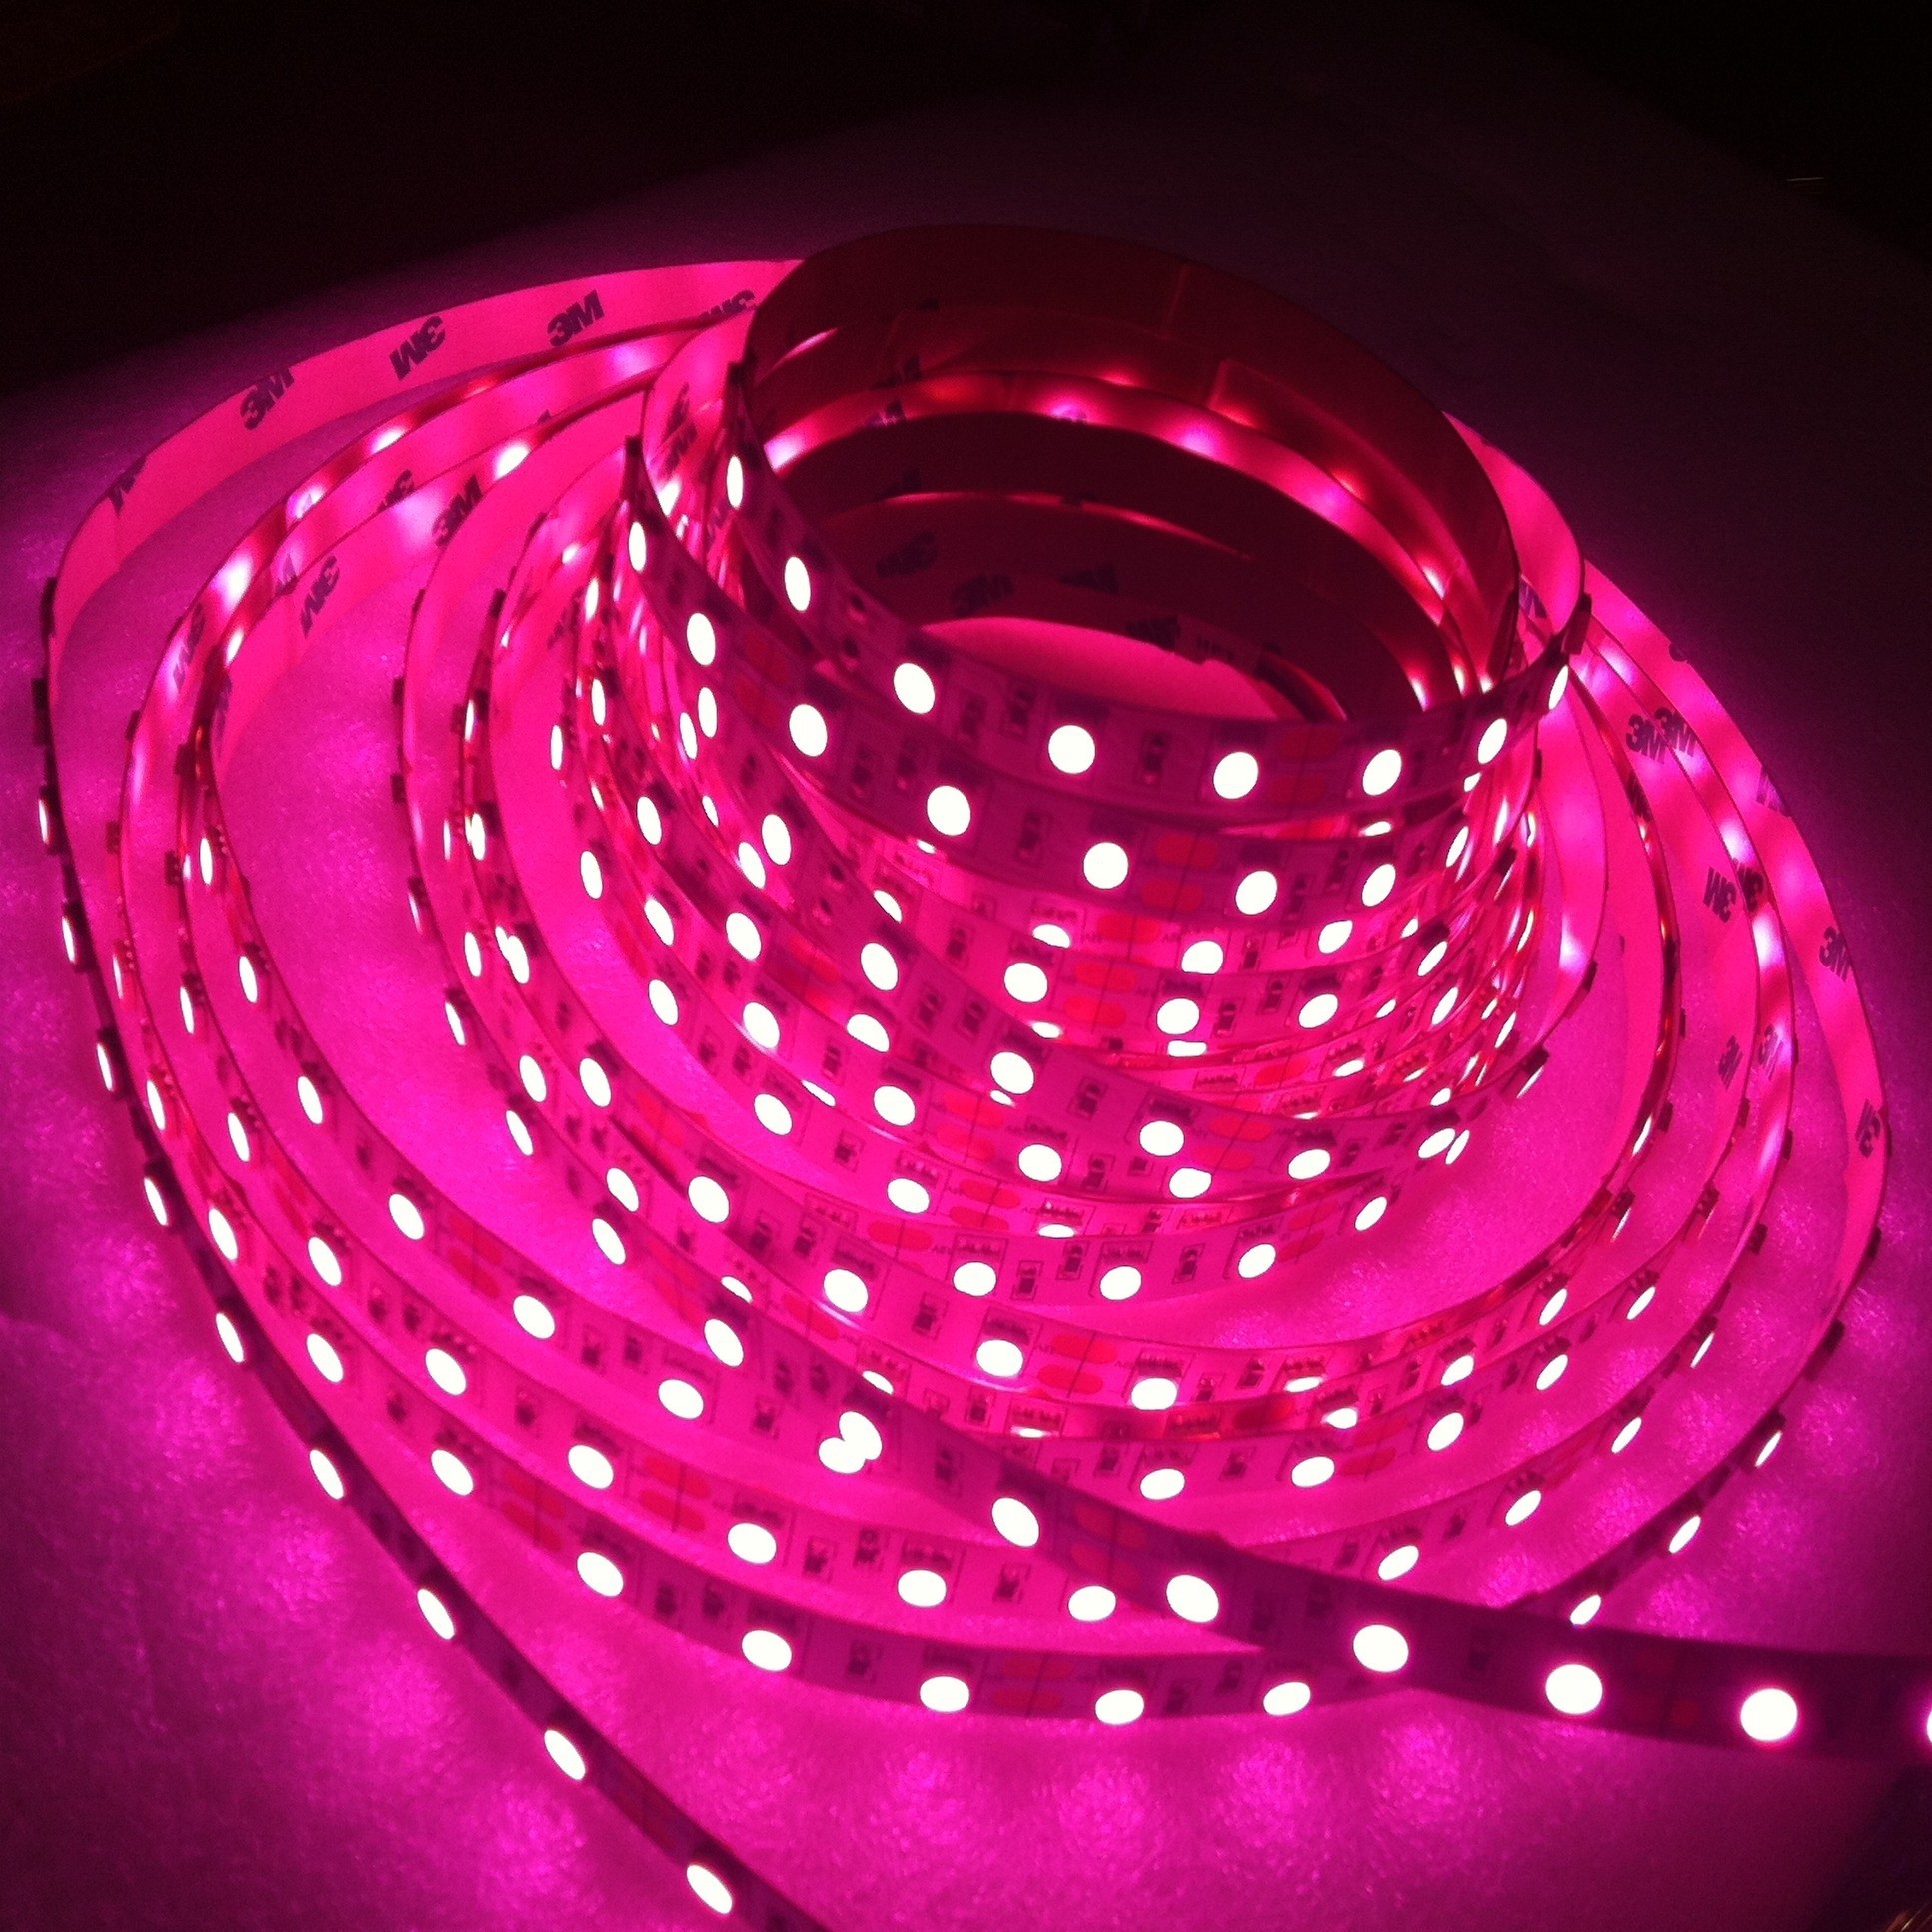 SMD 5050 Pink Flexible Strip Light 5M 300 Leds Non-Waterproof